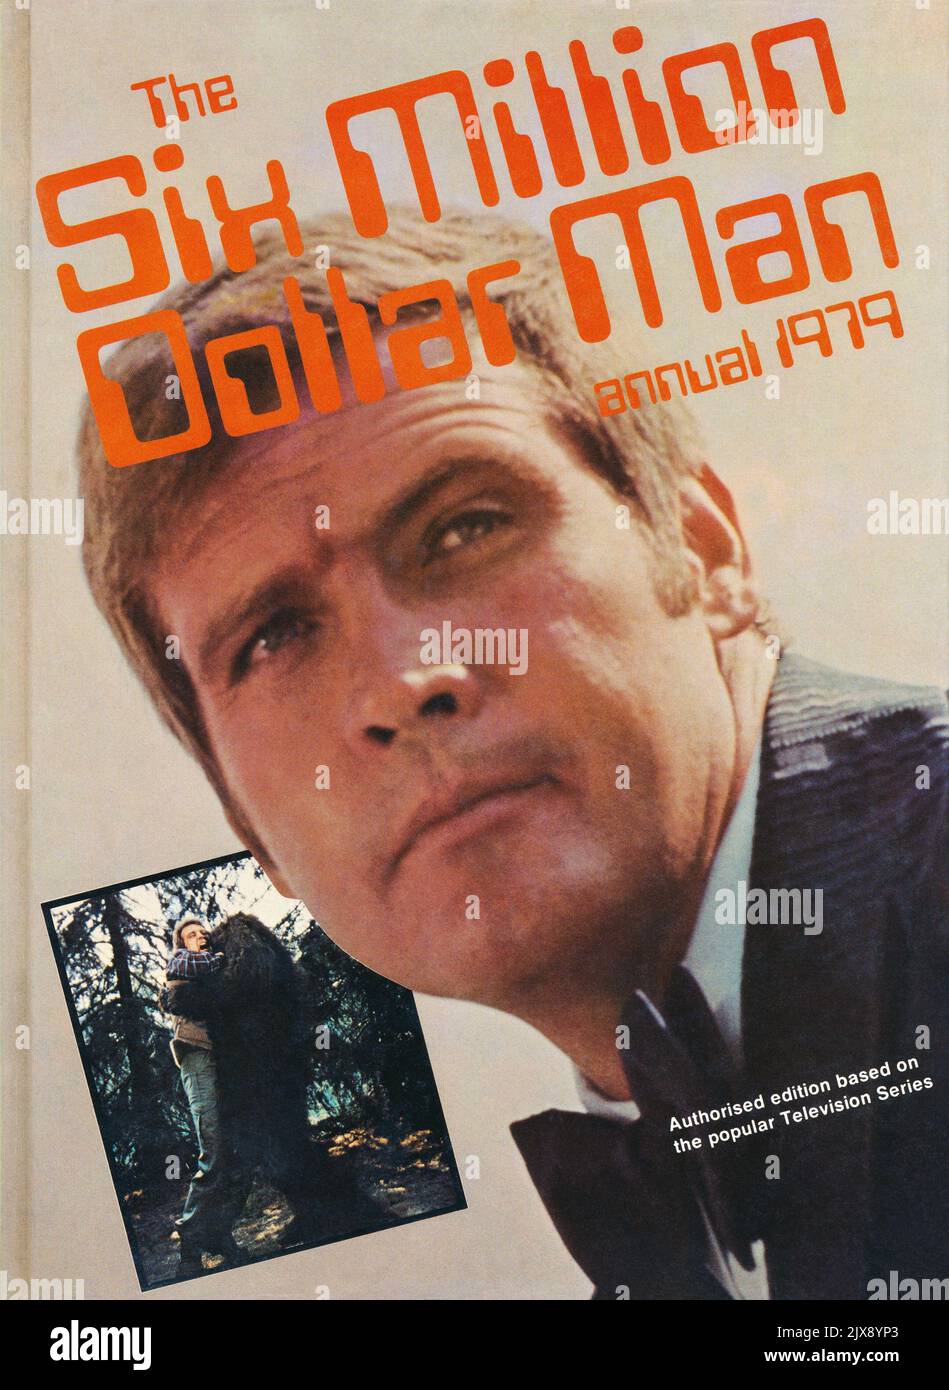 Front cover of a vintage Six Million Dollar Man annual from 1979, featuring actor Lee Majors as Colonel Steve Austin. Stock Photo